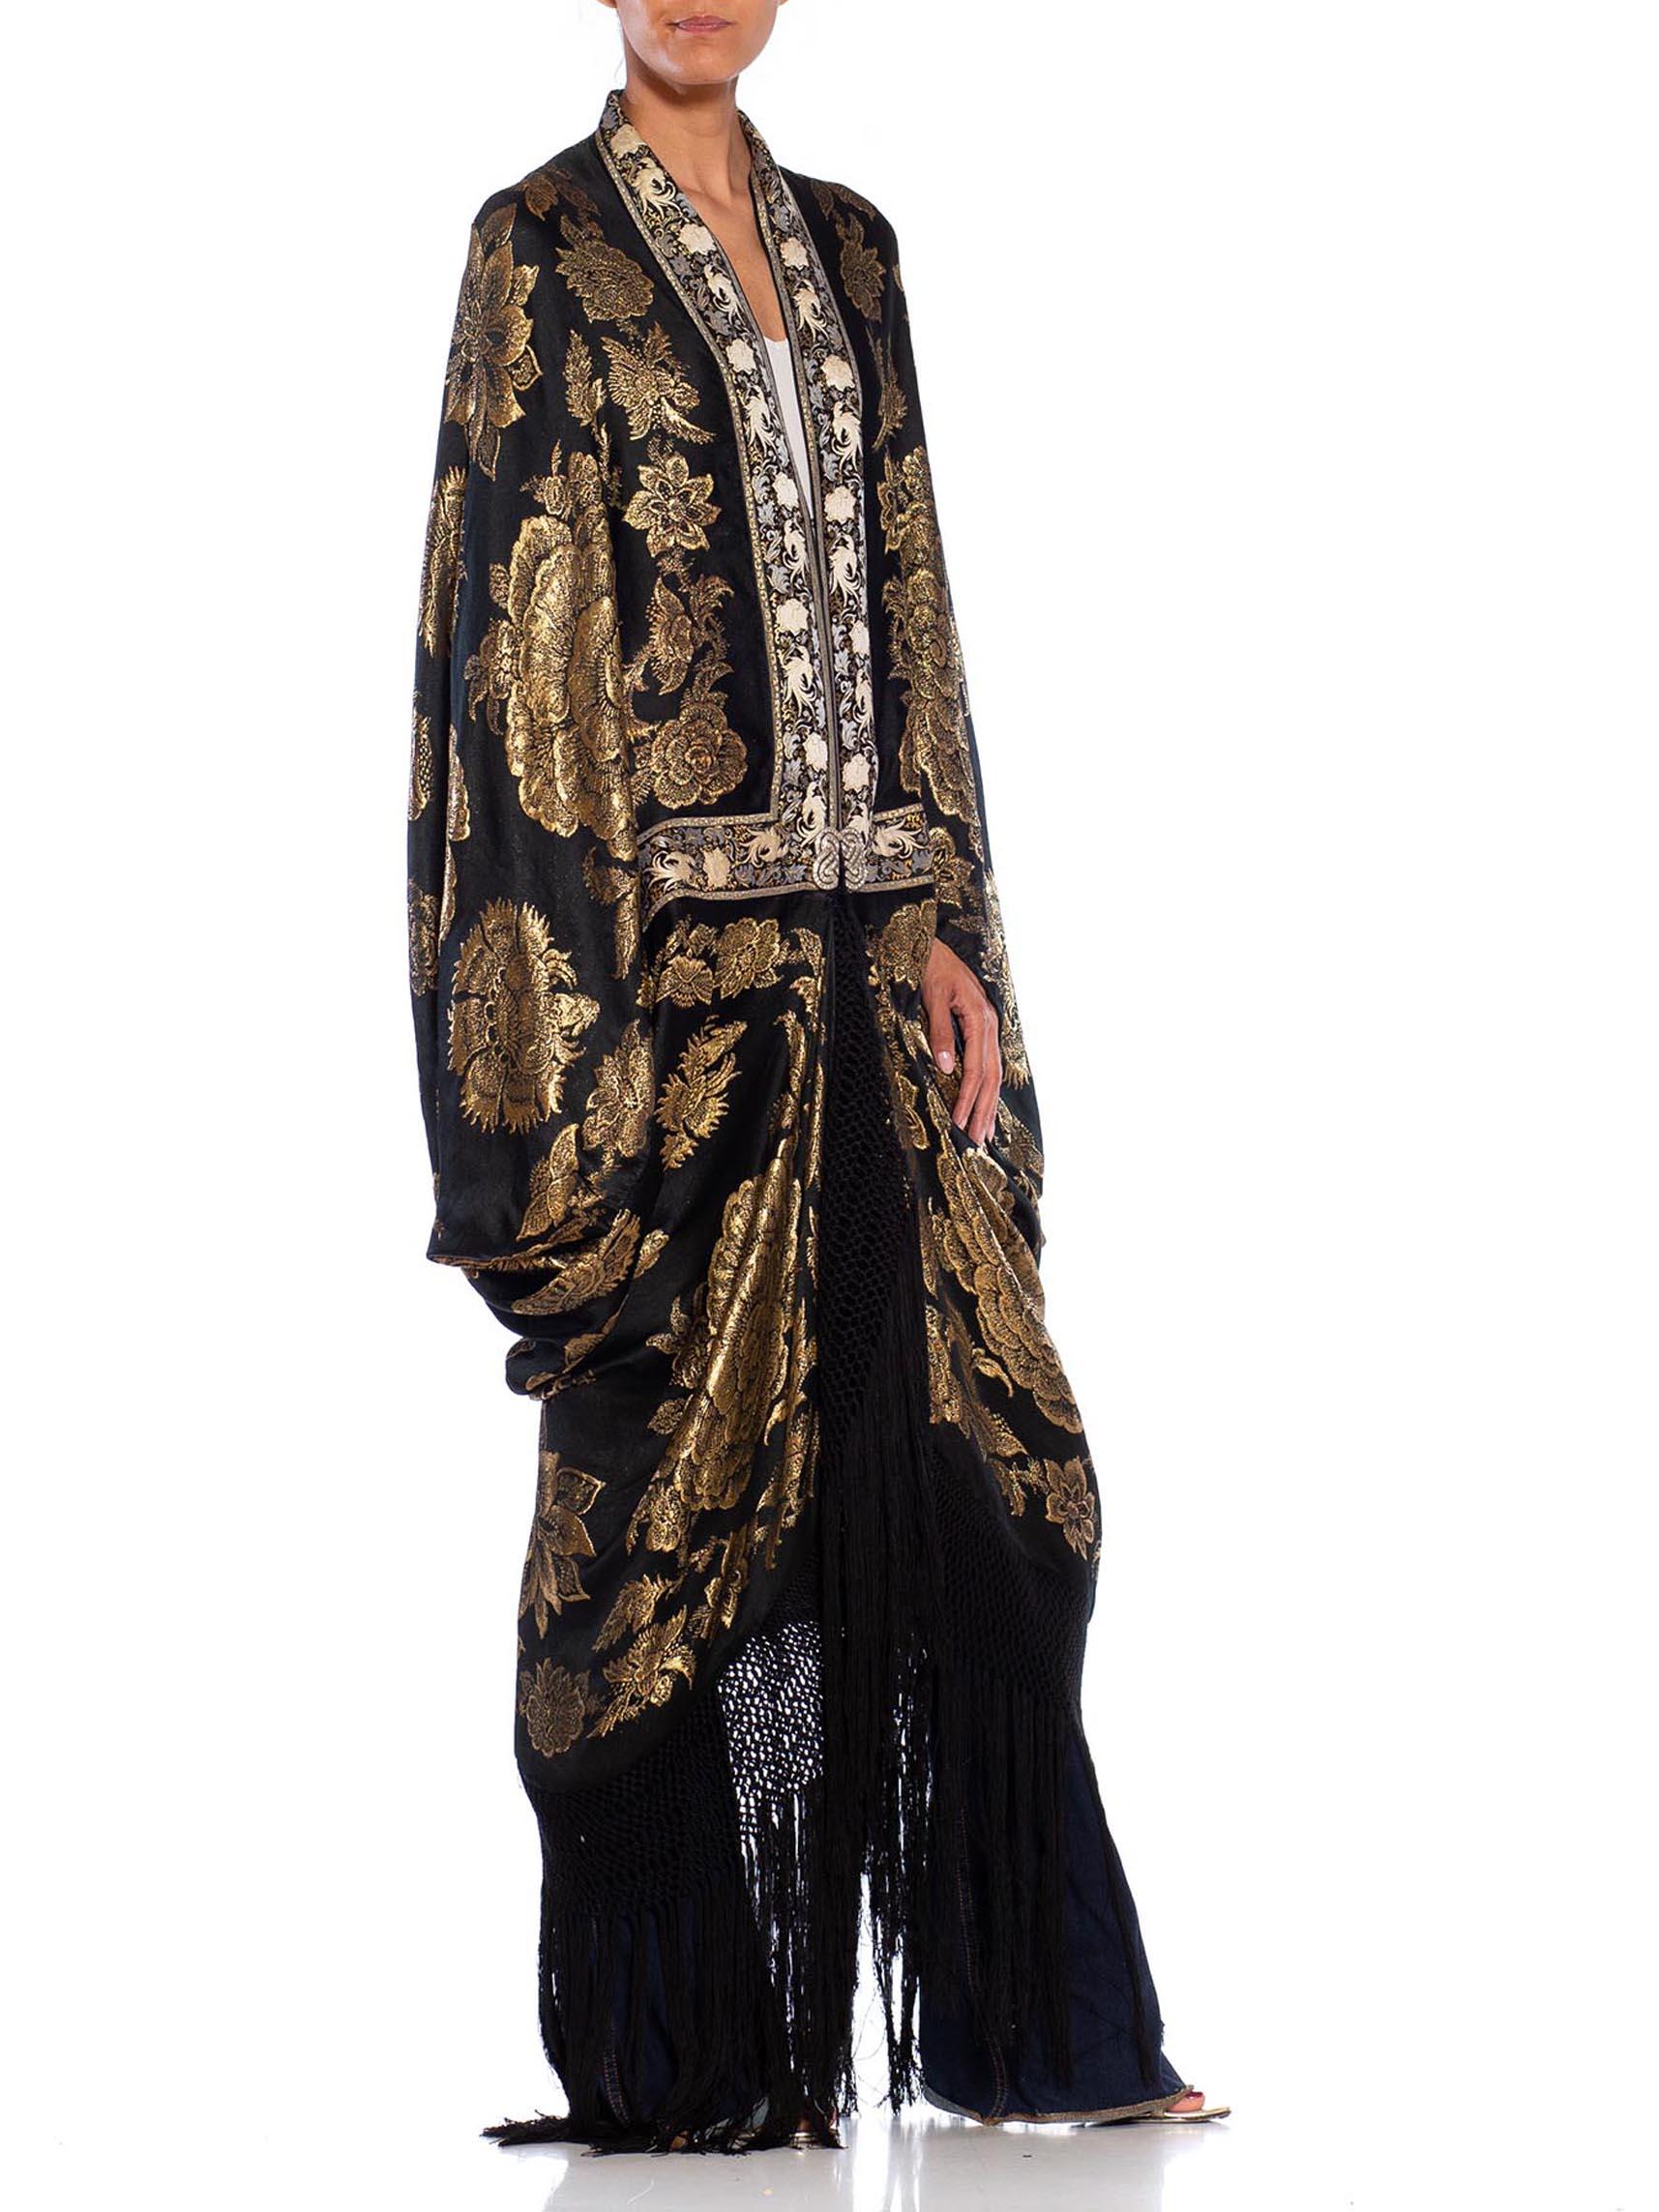 MORPHEW COLLECTION Black, Gold & Cream Metallic Silk Lamé Cocoon With Fringe An For Sale 2